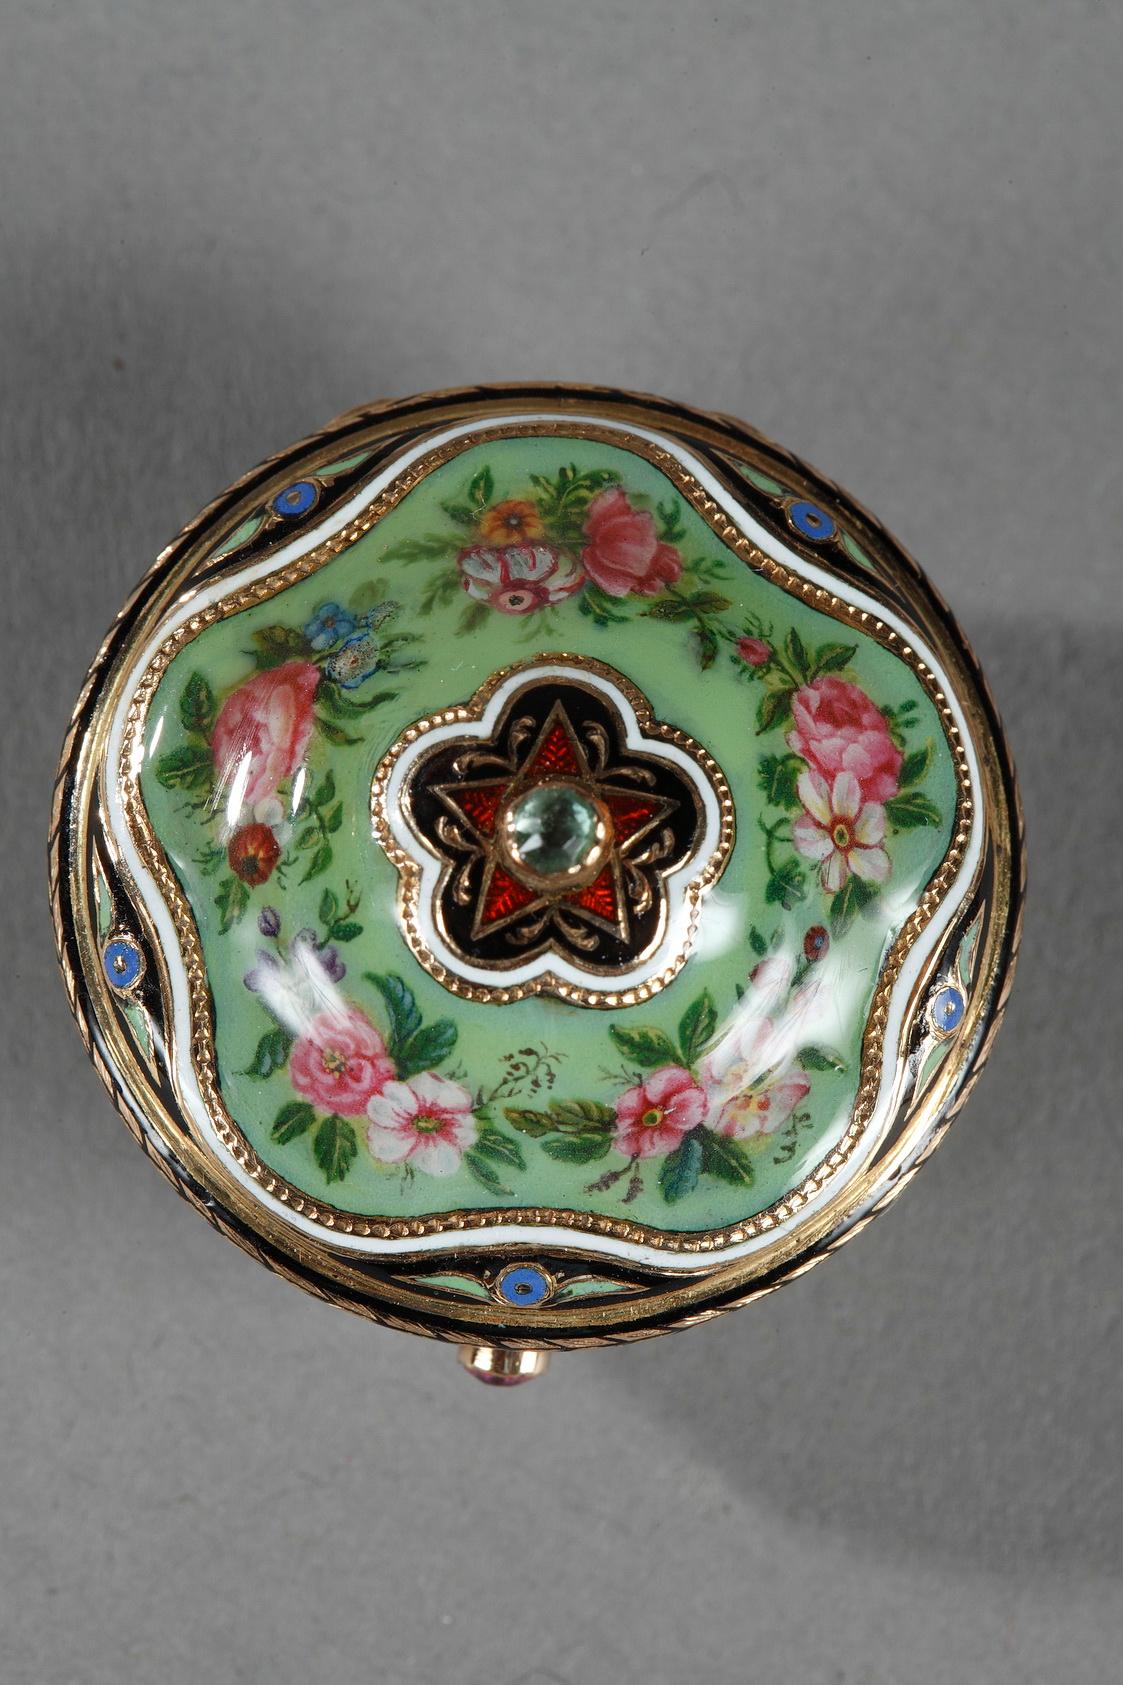 Pot-shaped, gold vinaigrette in green enamel embellished with a multicolored floral motif. The hinged lid is decorated with a flowers and topped with a translucent, red enamel star and a precious stone in the center. The body of the vinaigrette